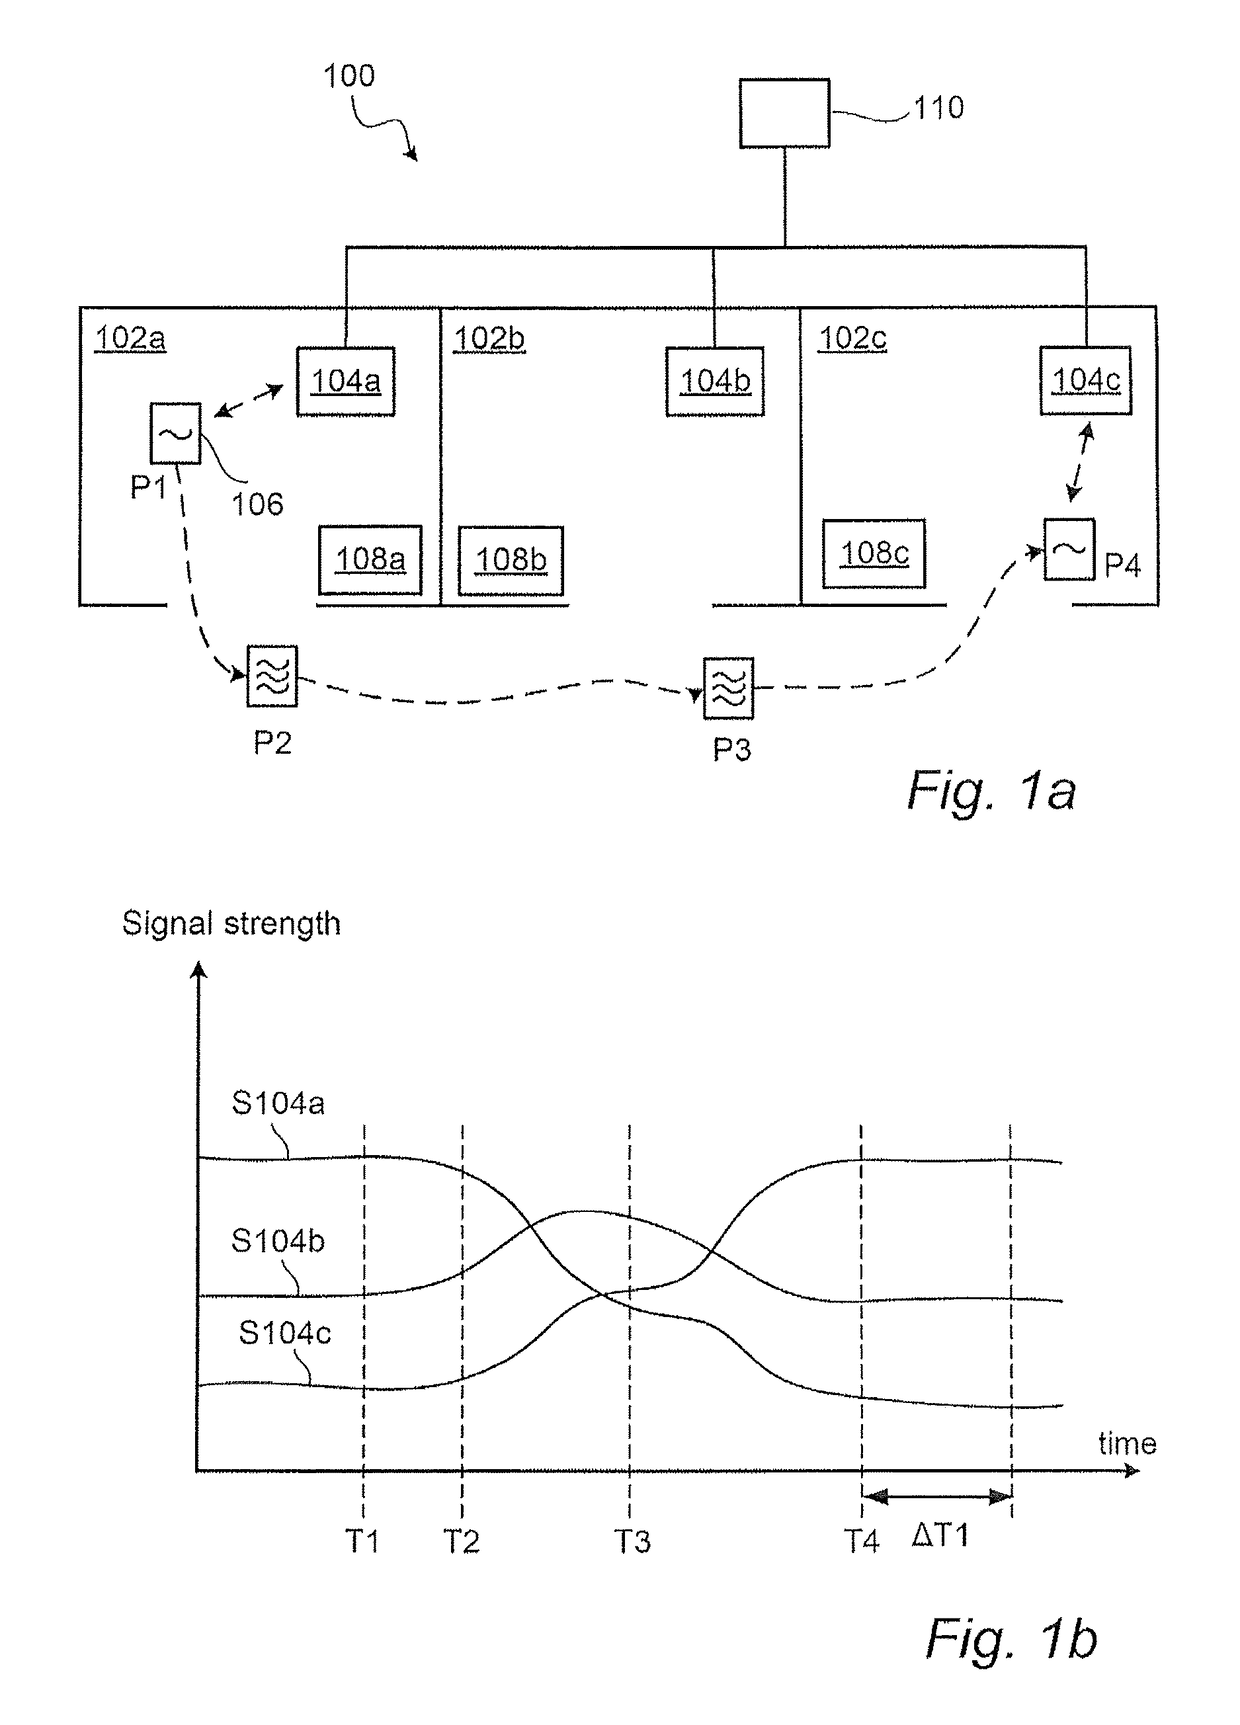 Association of a portable sensor device in a building management system